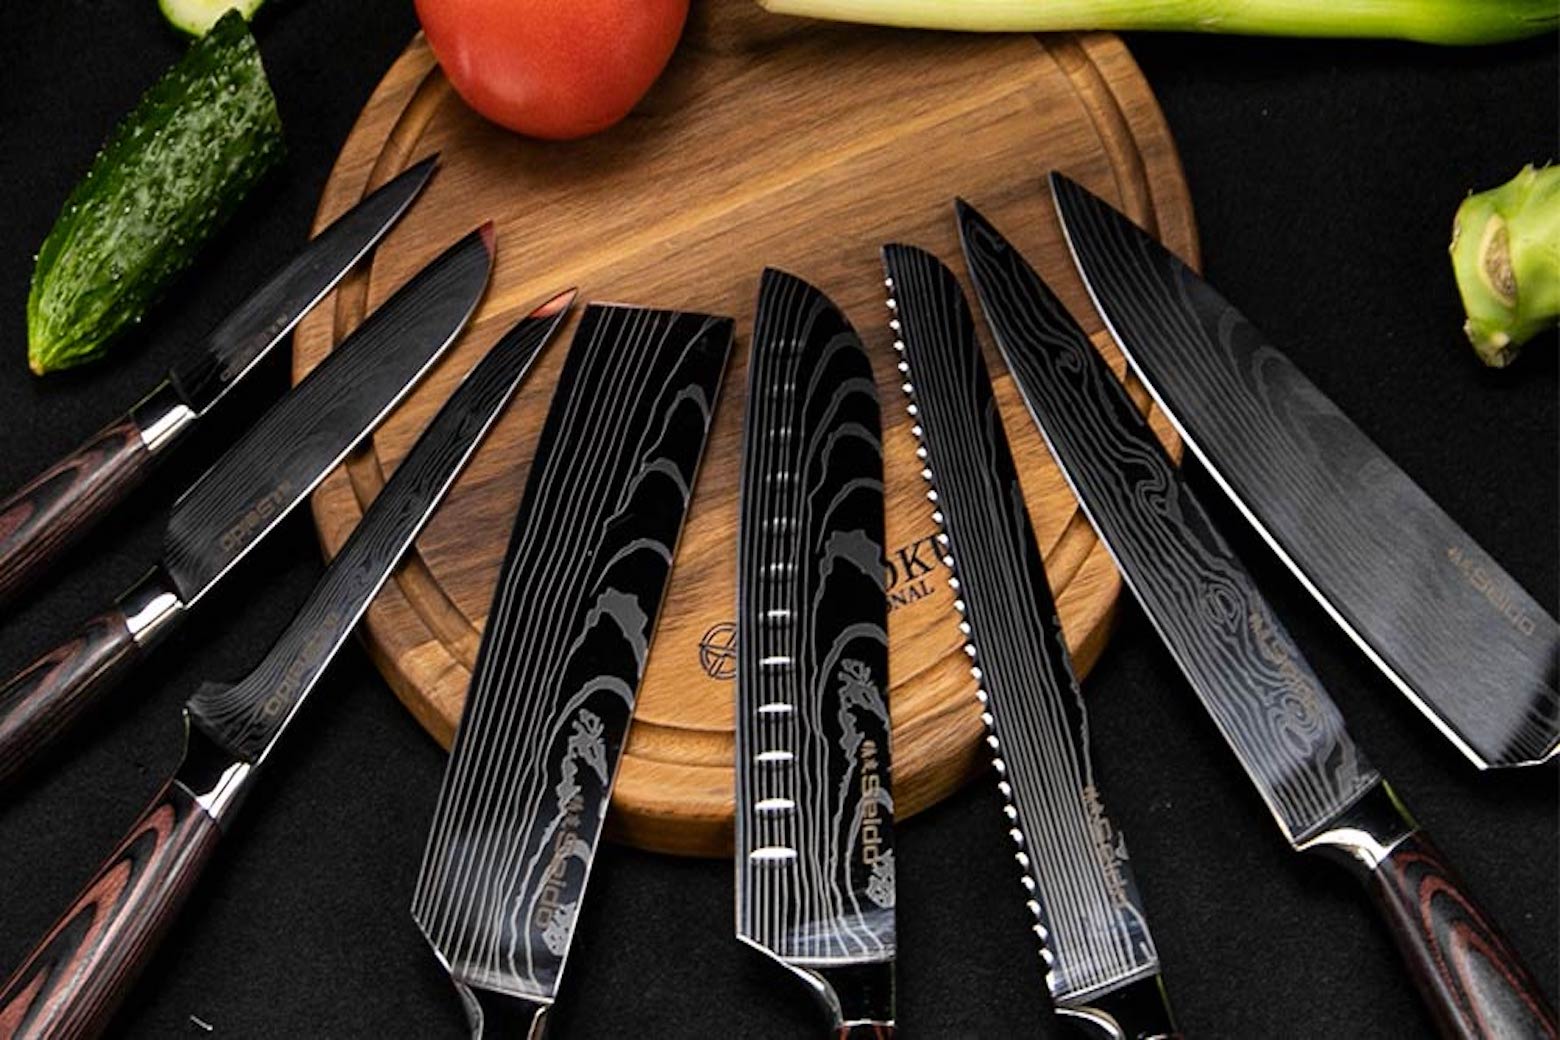 This set of forged Japanese knives is a pretty knife gift for the chef in your life, especially at just $89.99.